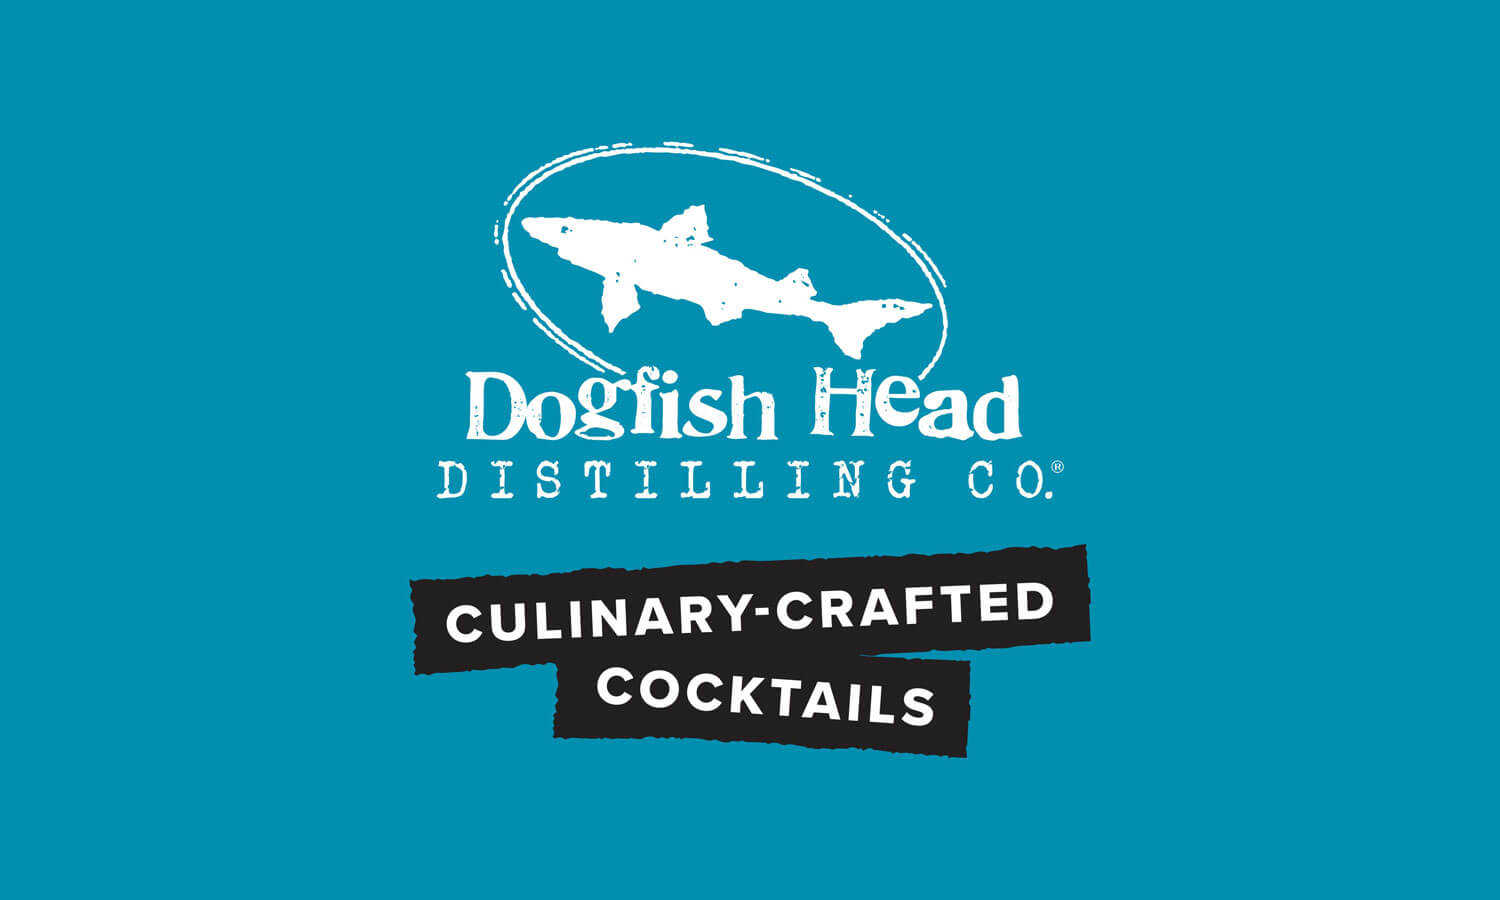 Moxie-Sozo-Dogfish-Head-Canned-Cocktails-Template-01_5x3